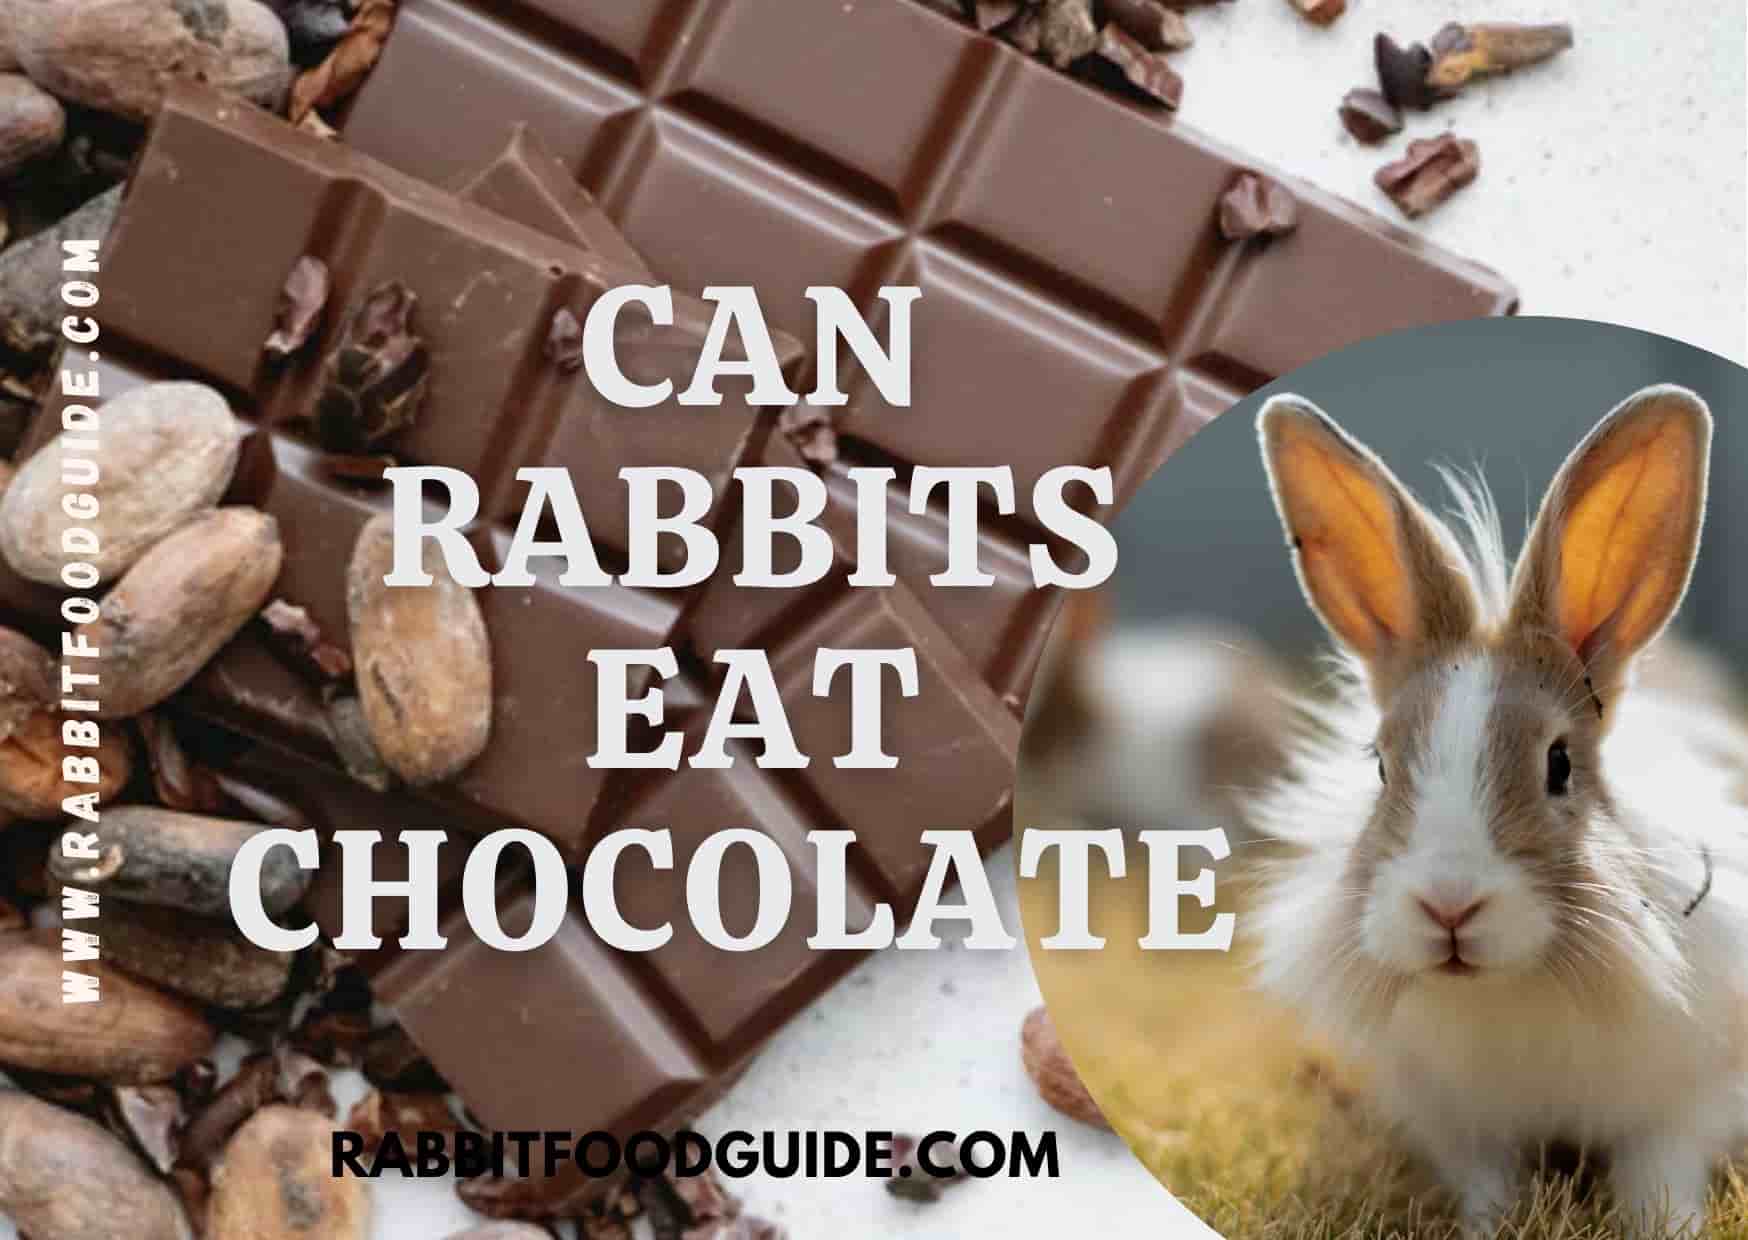 can rabbits eat chocolate?